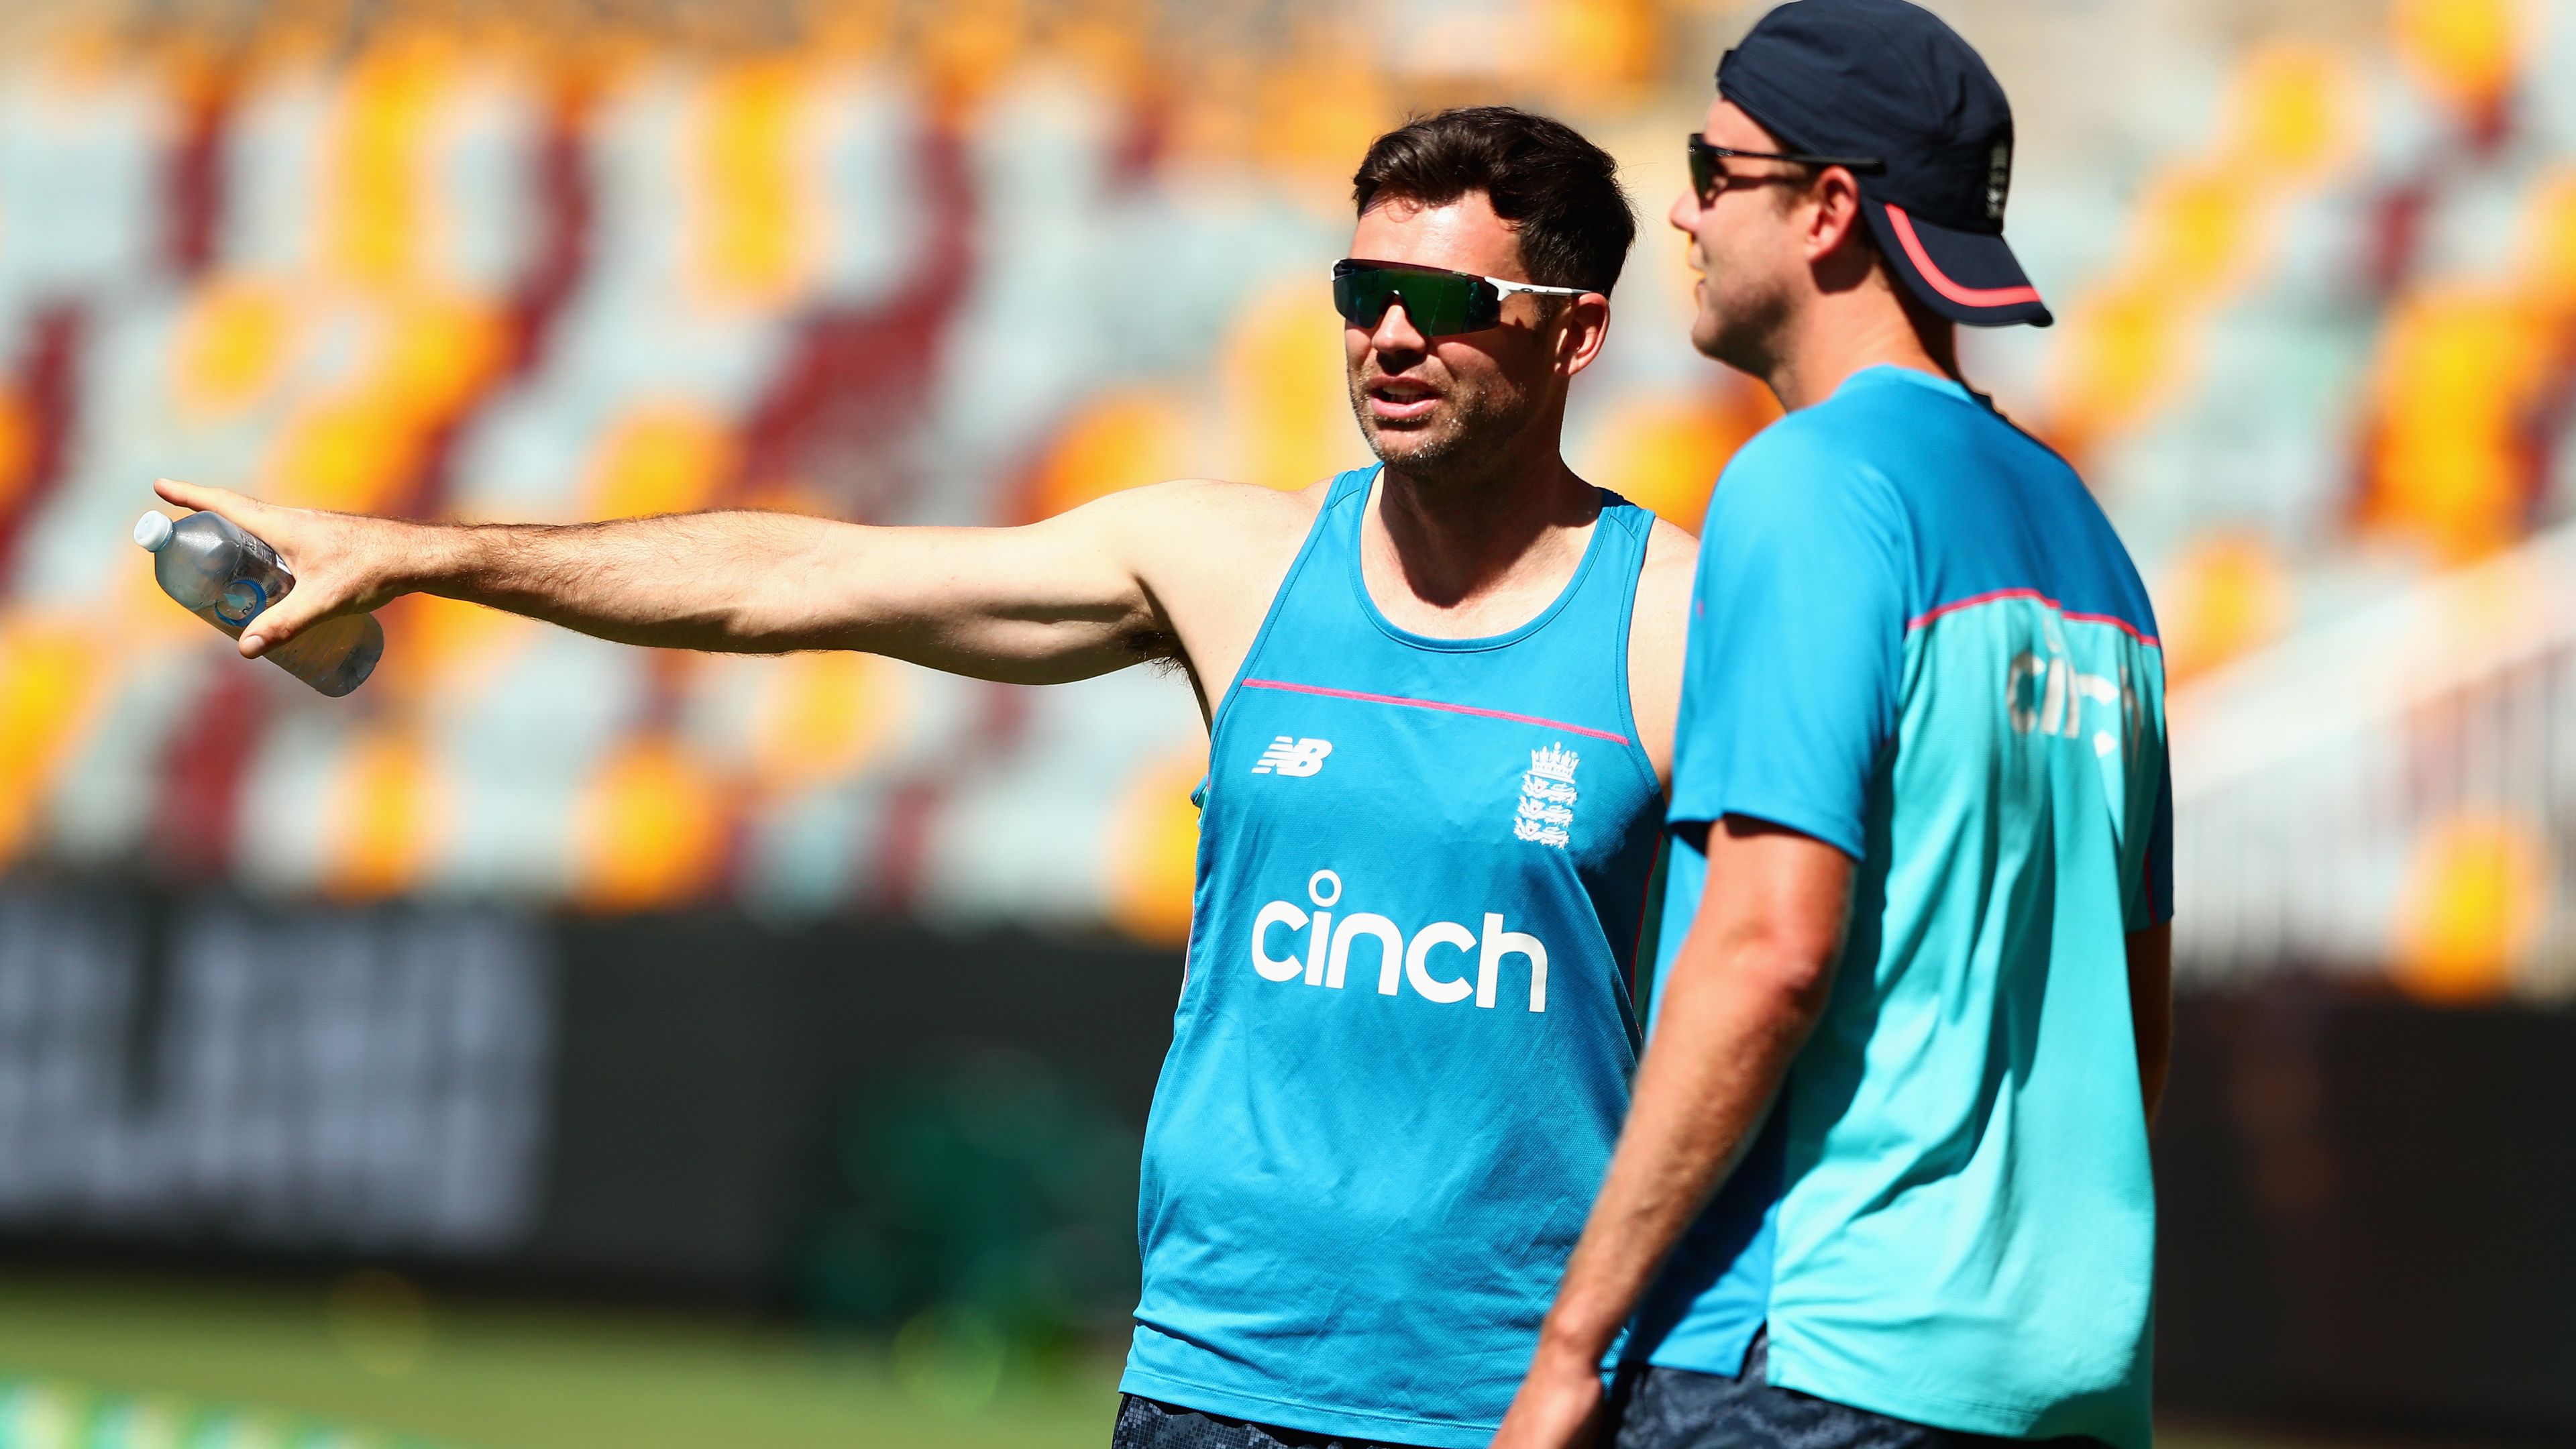 James Anderson and Stuart Broad were running water at the Gabba instead of playing.